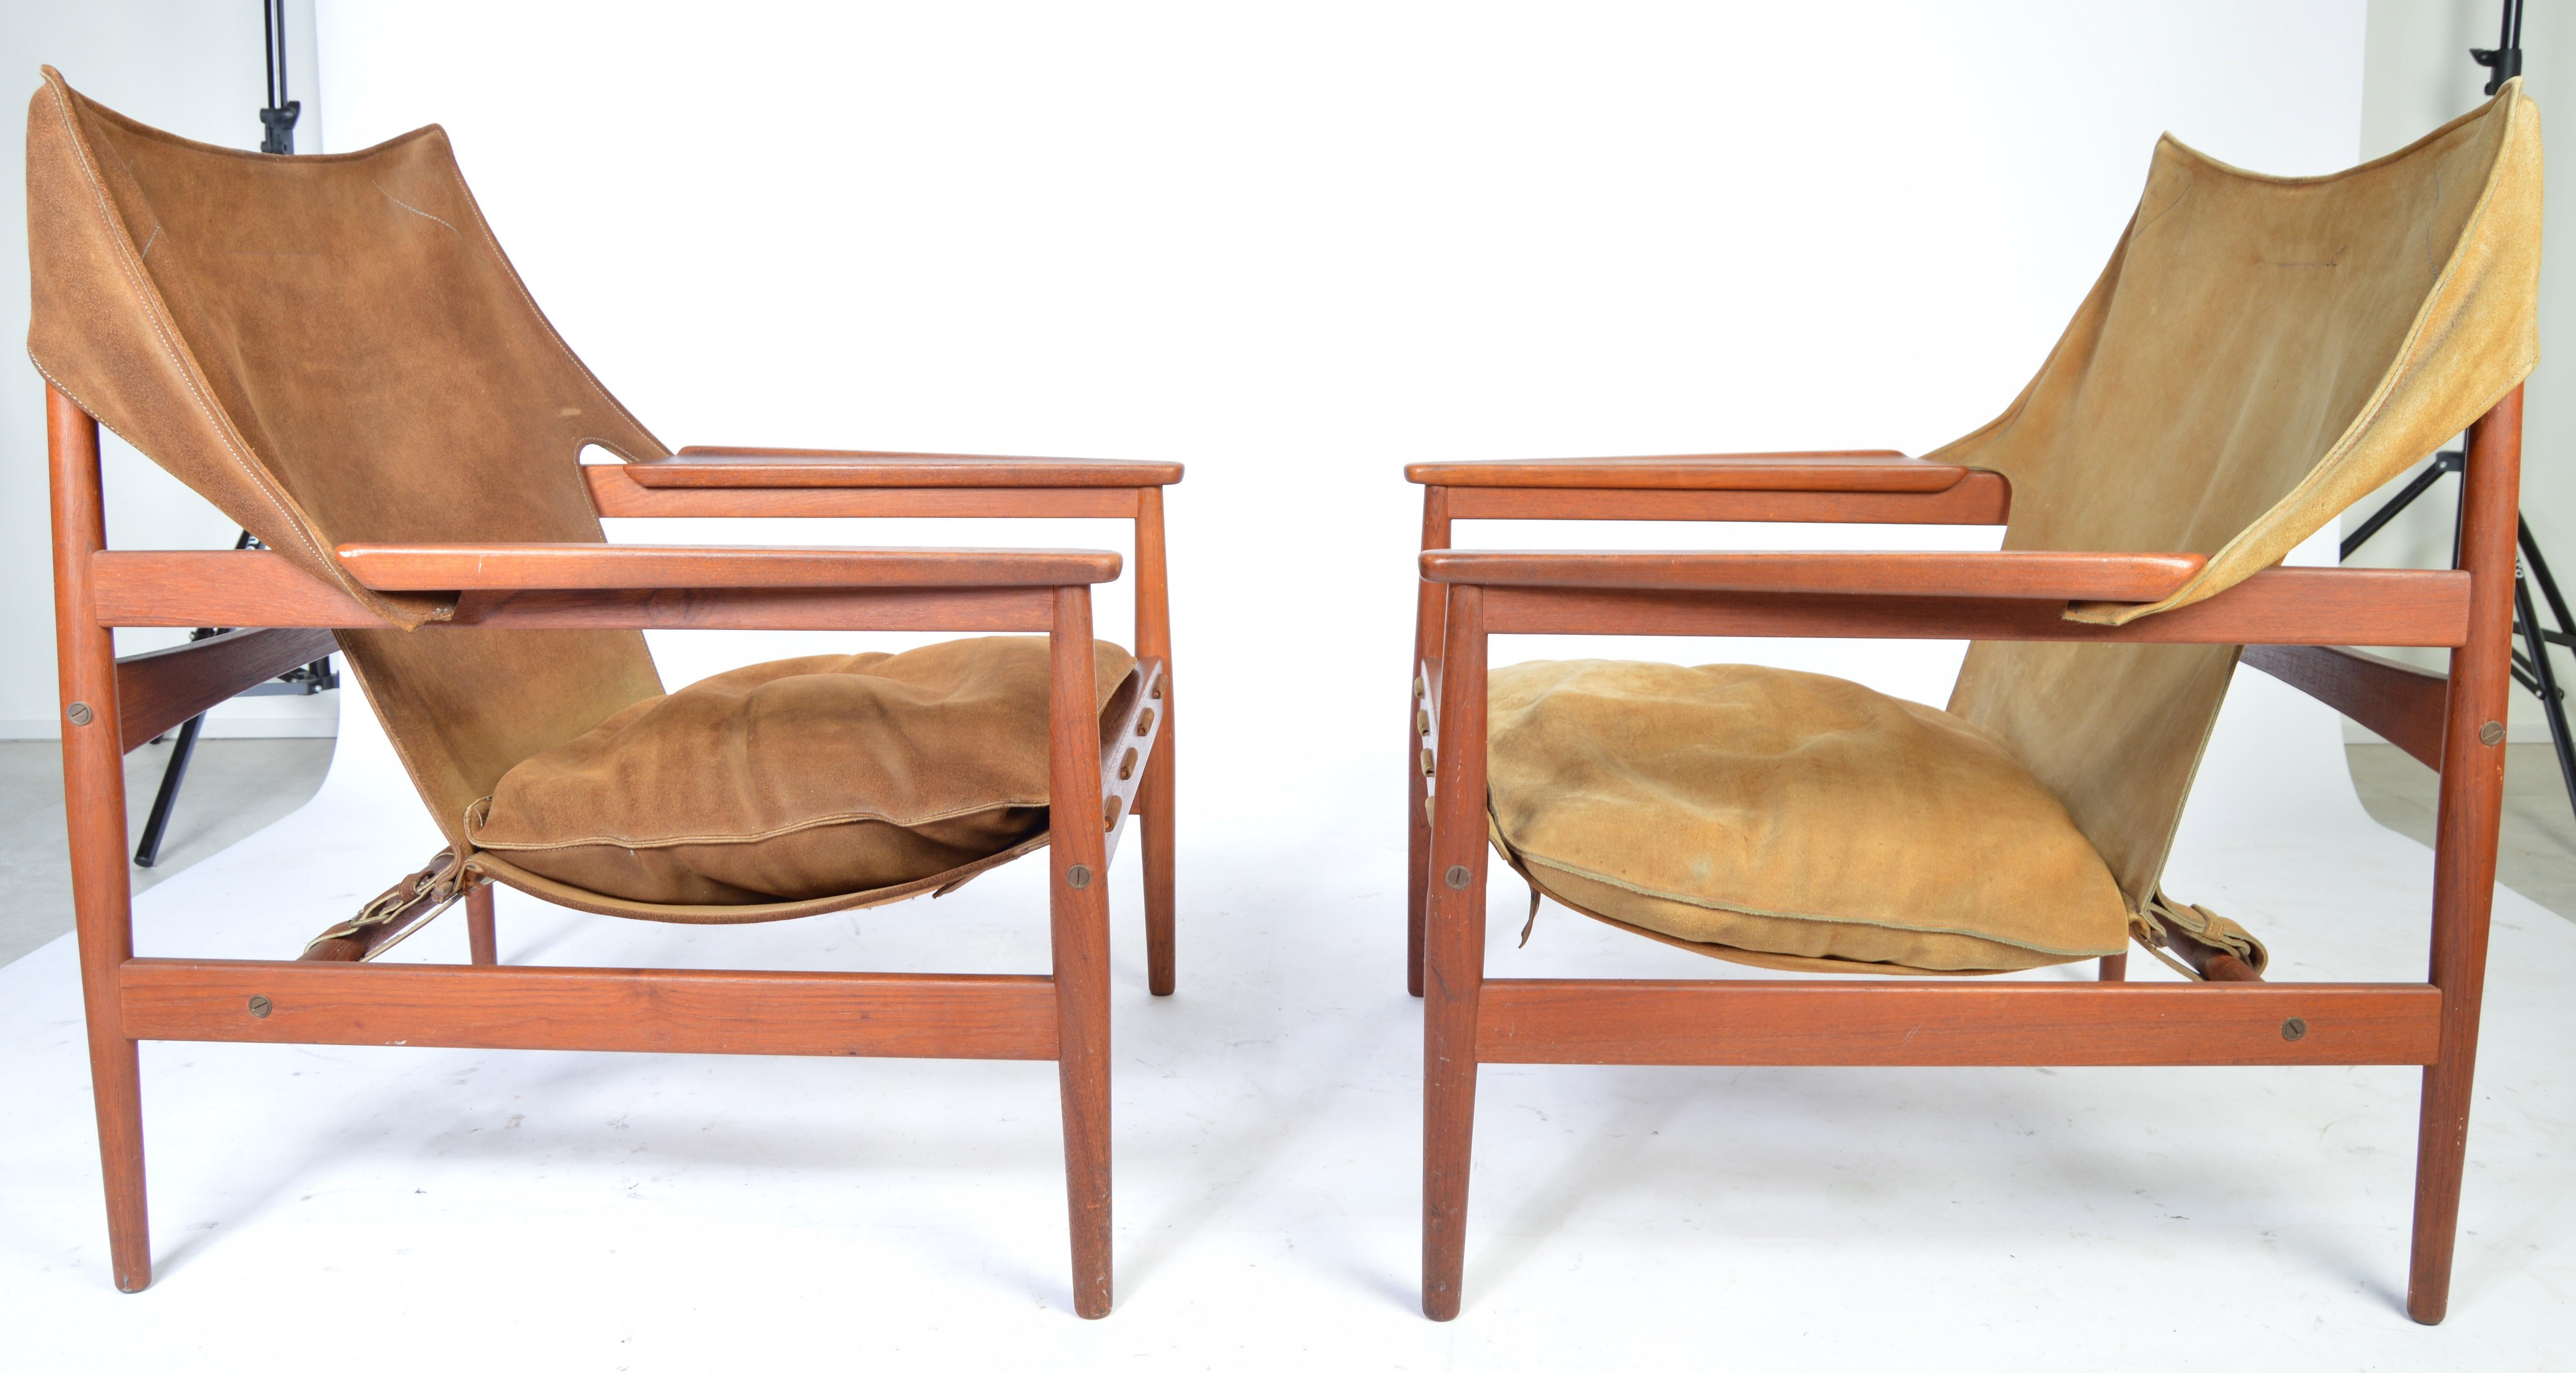 A pair of 'Kinna' easy chairs designed by Hans Olsen for Viska Mobler in Sweden having teak frames with suede seats and backrests.
Both signed and in very good vintage condition.